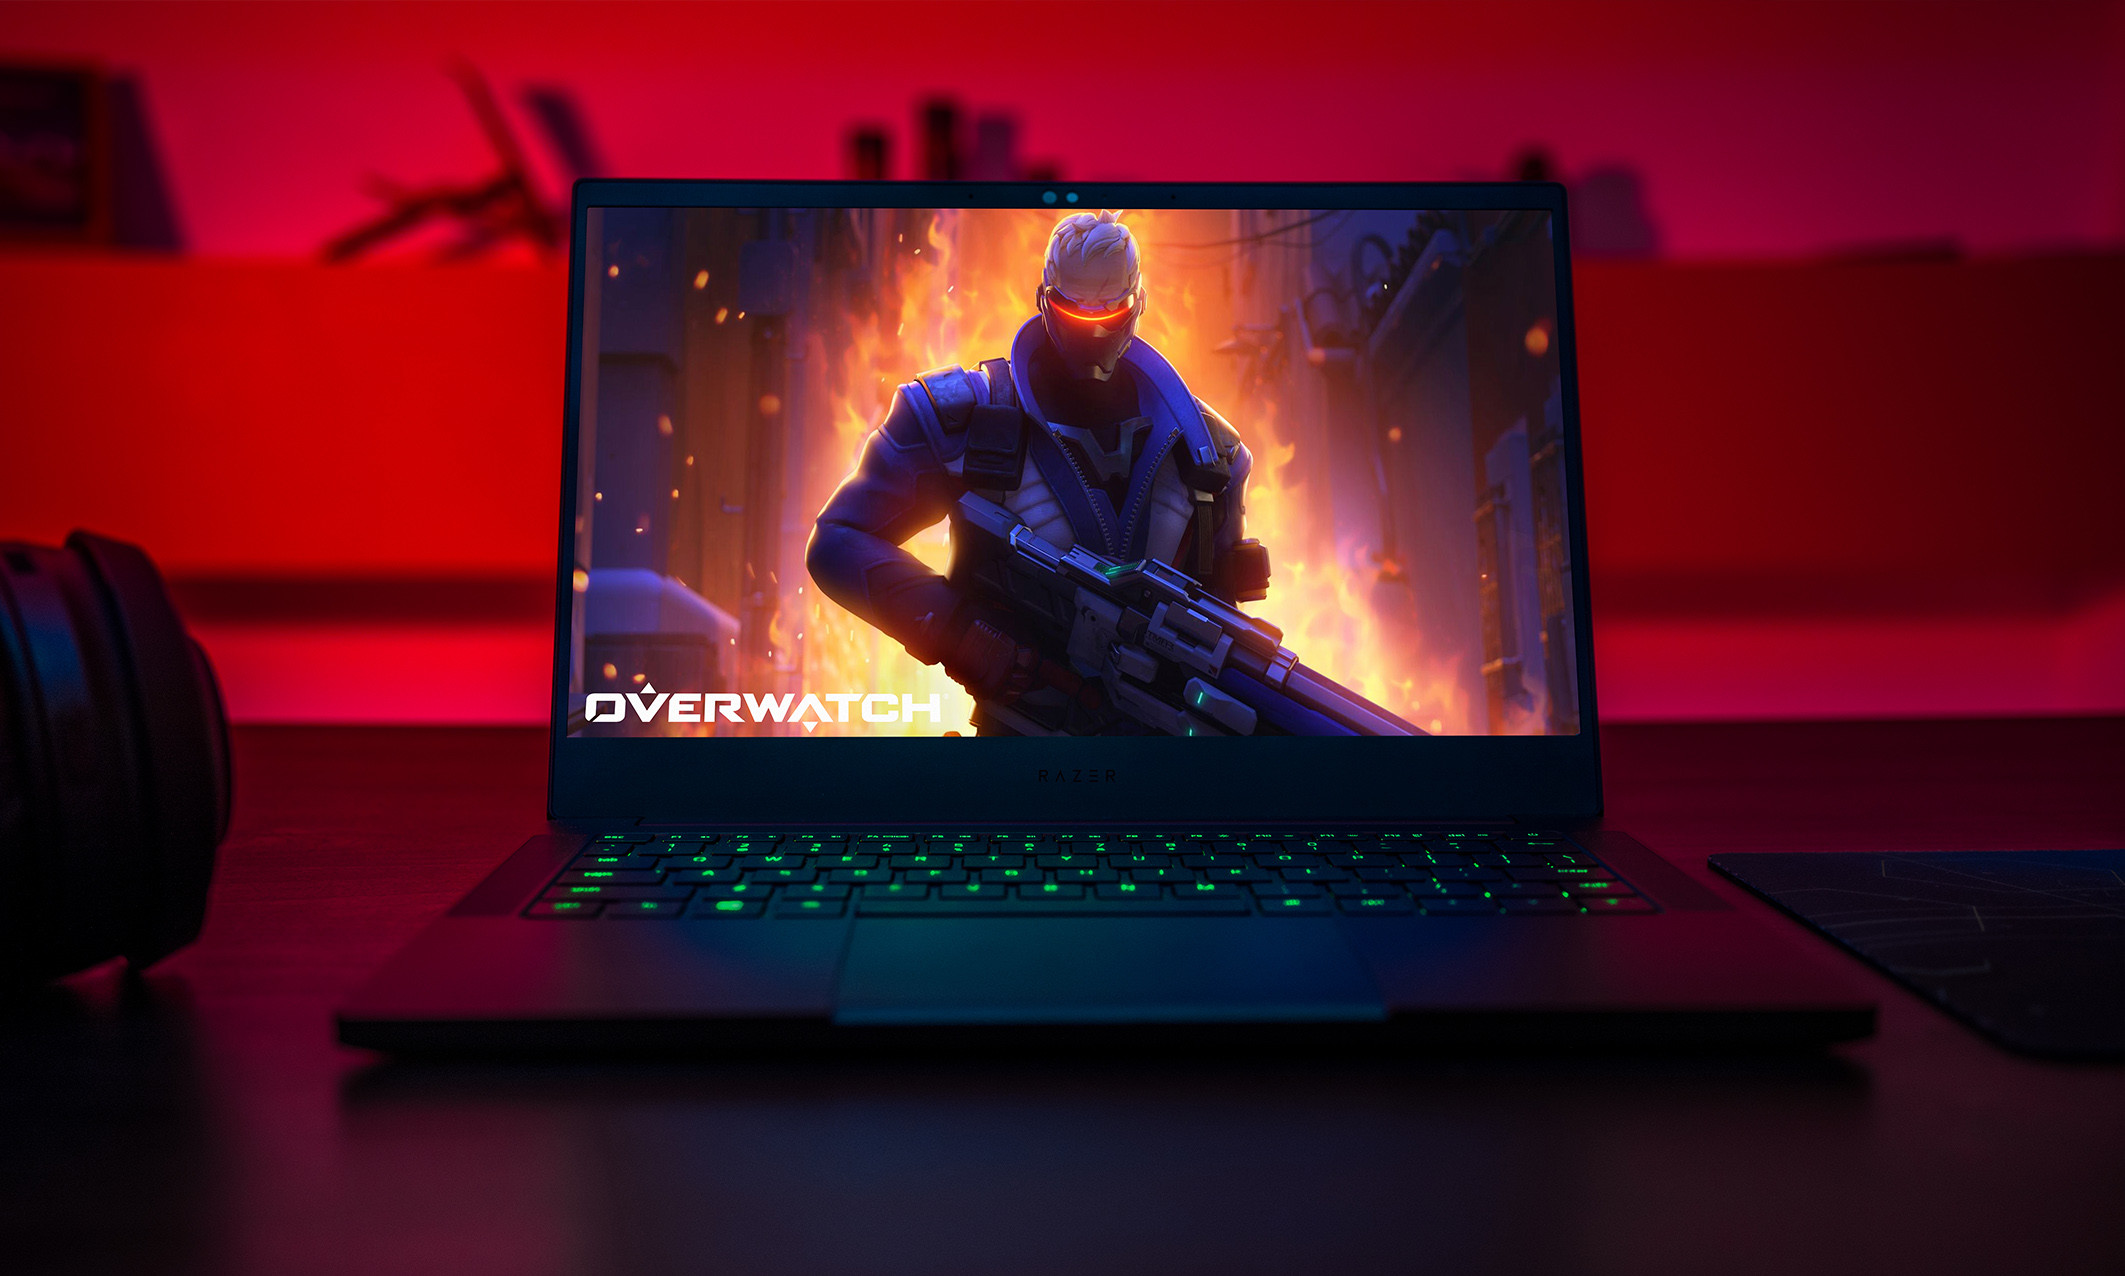 2125x1276 ... a first for the Razer Blade family. Razer also retained the ideal web  camera placement at the top of the screen to avoid awkward shots.